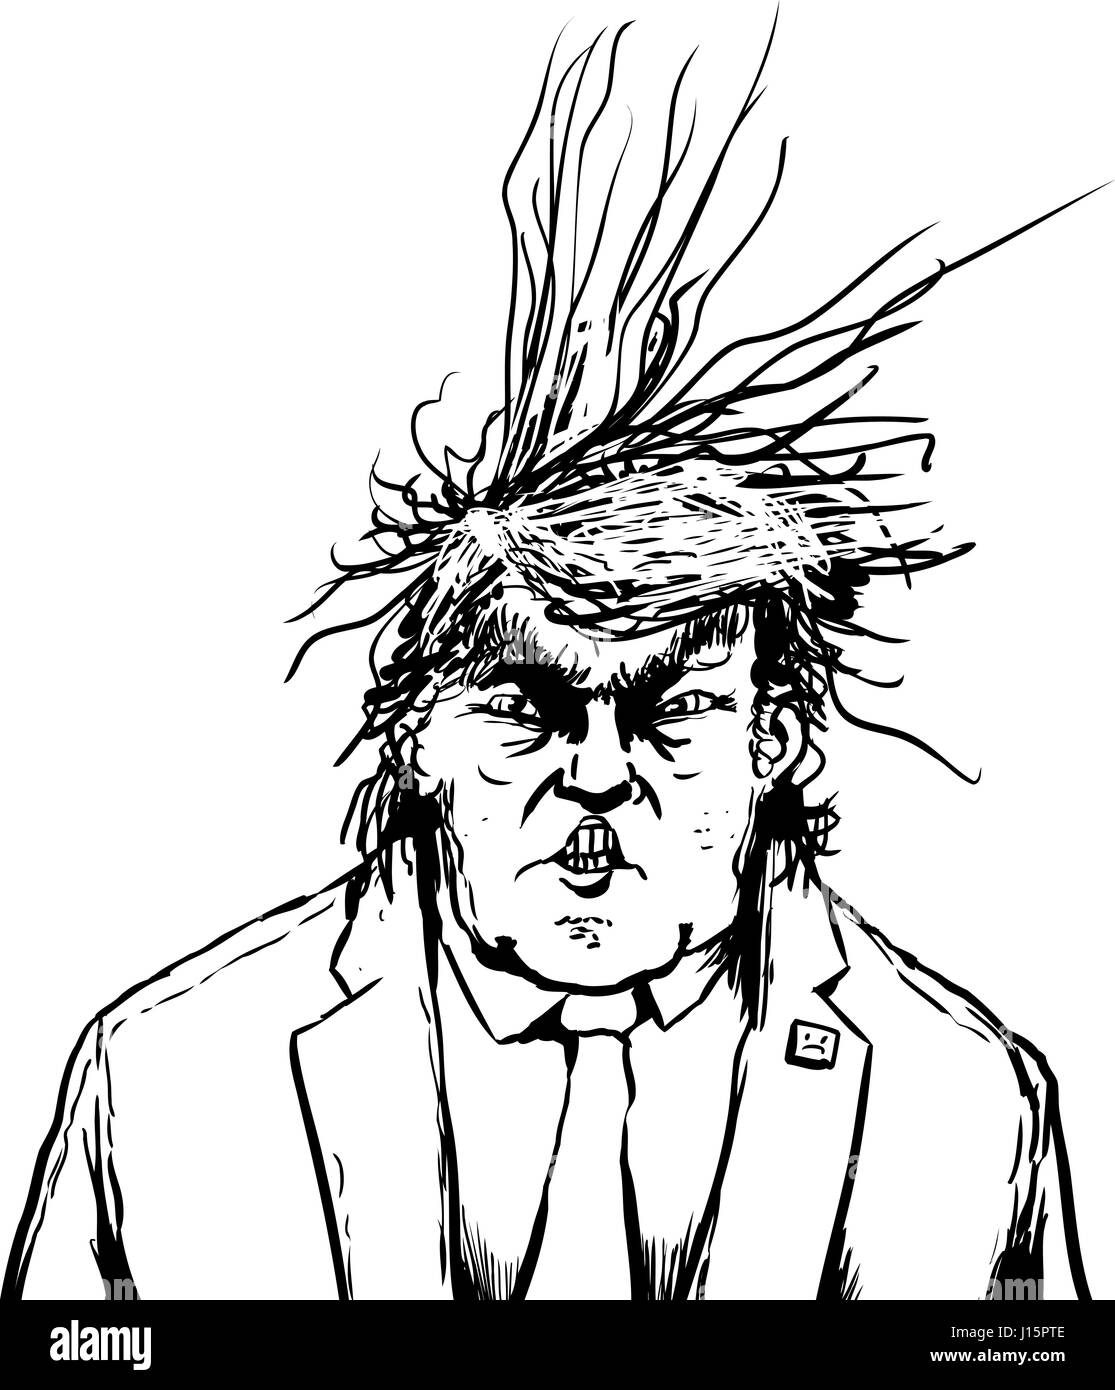 April 18, 2017. Outline of Donald Trump with clenched teeth and frazzled hair Stock Photo